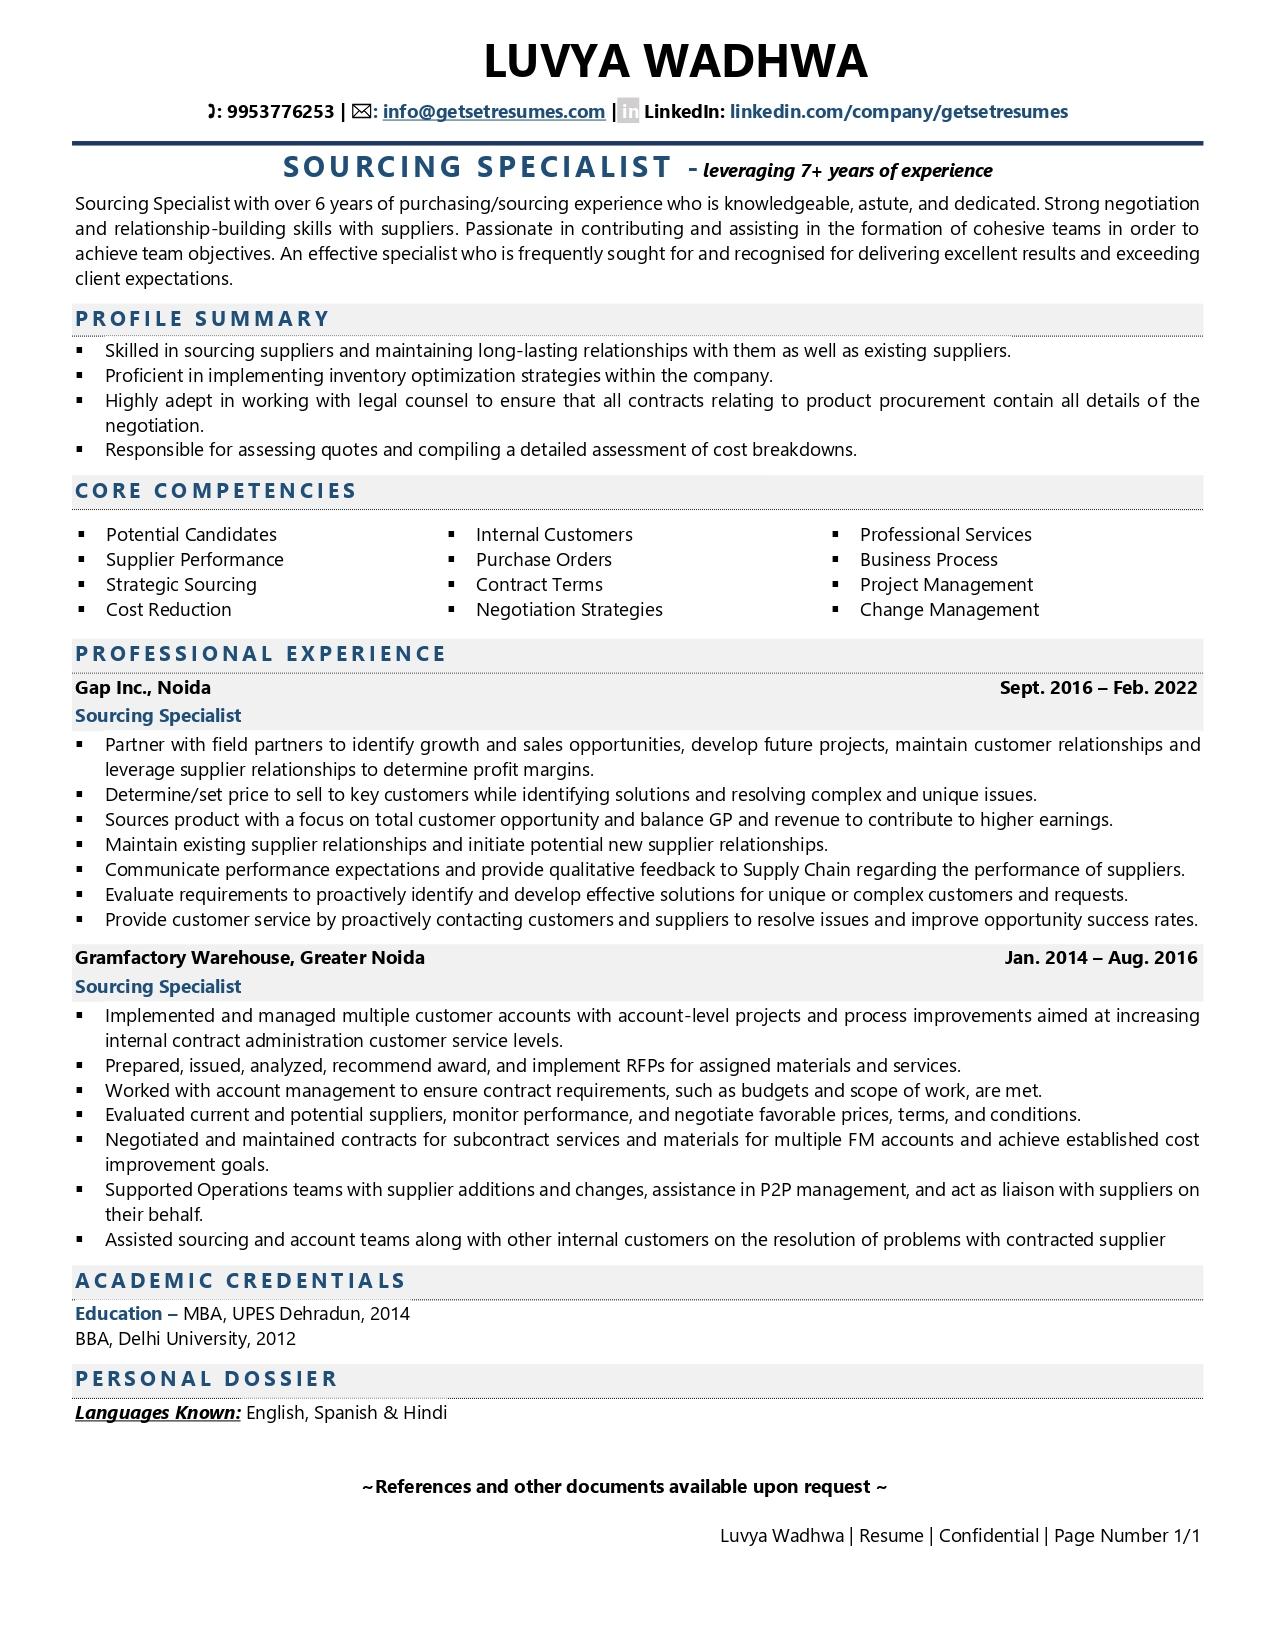 Sourcing Specialist - Resume Example & Template